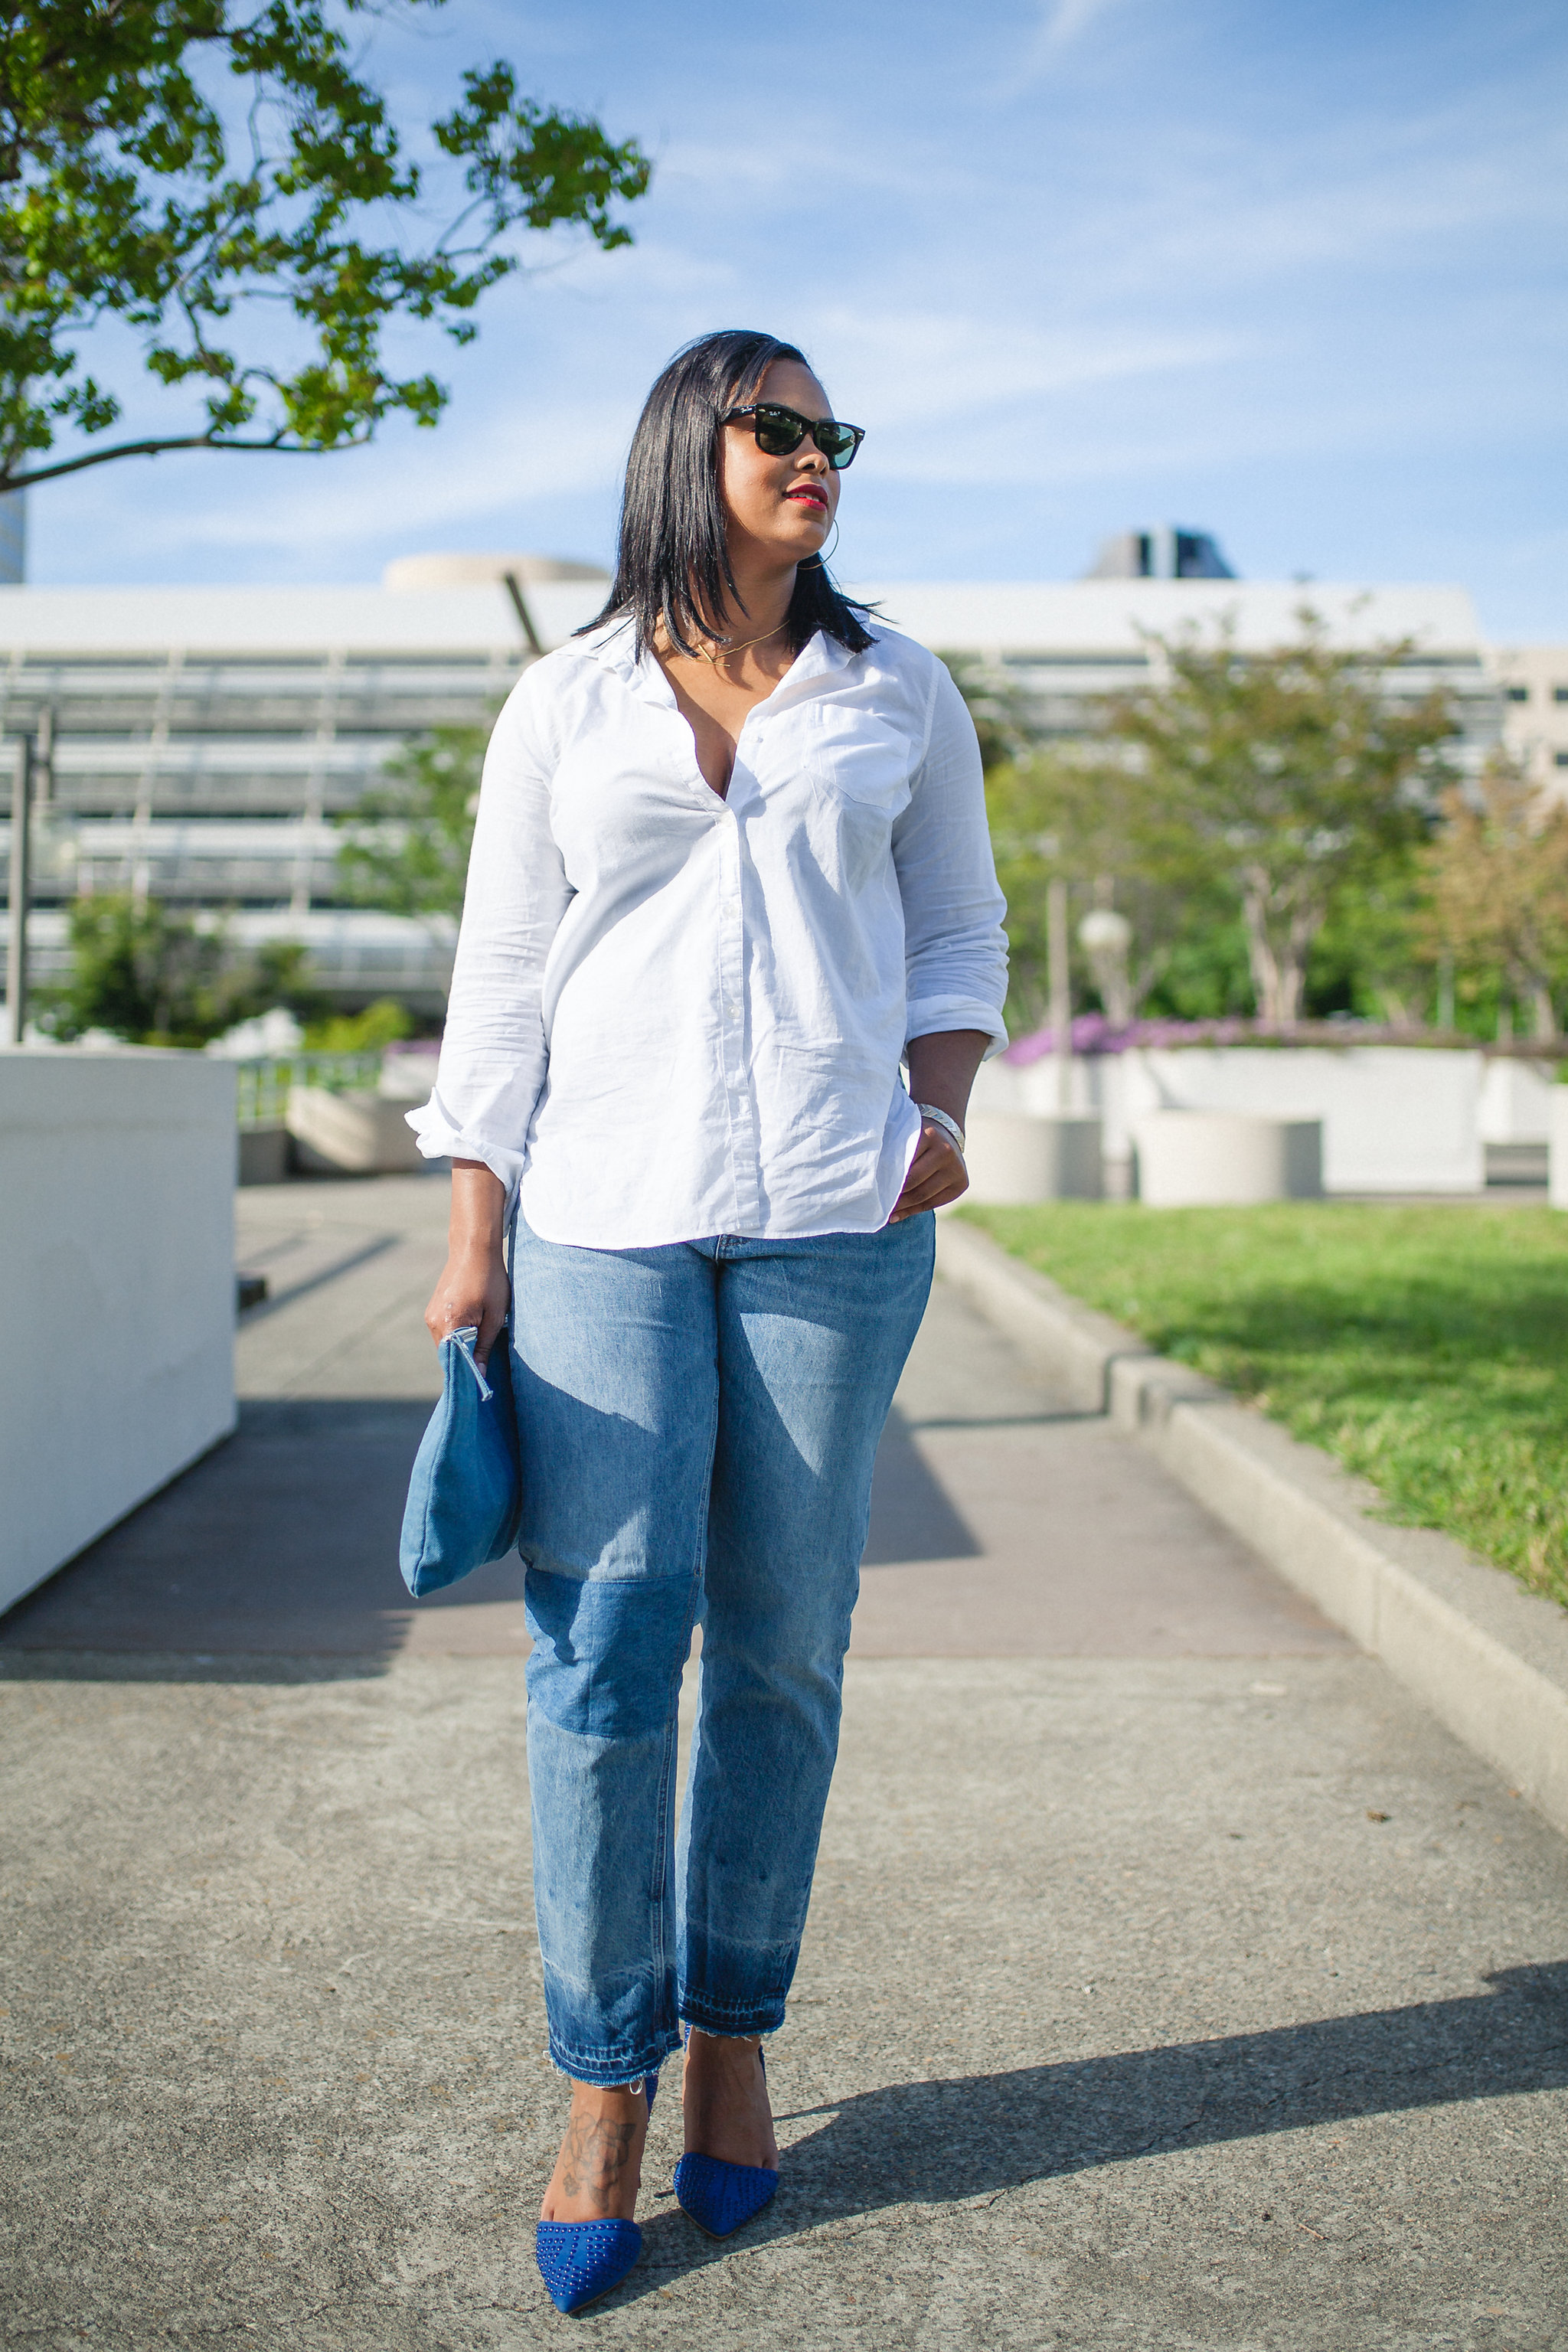 classic white shirt and midrise vintage jeans